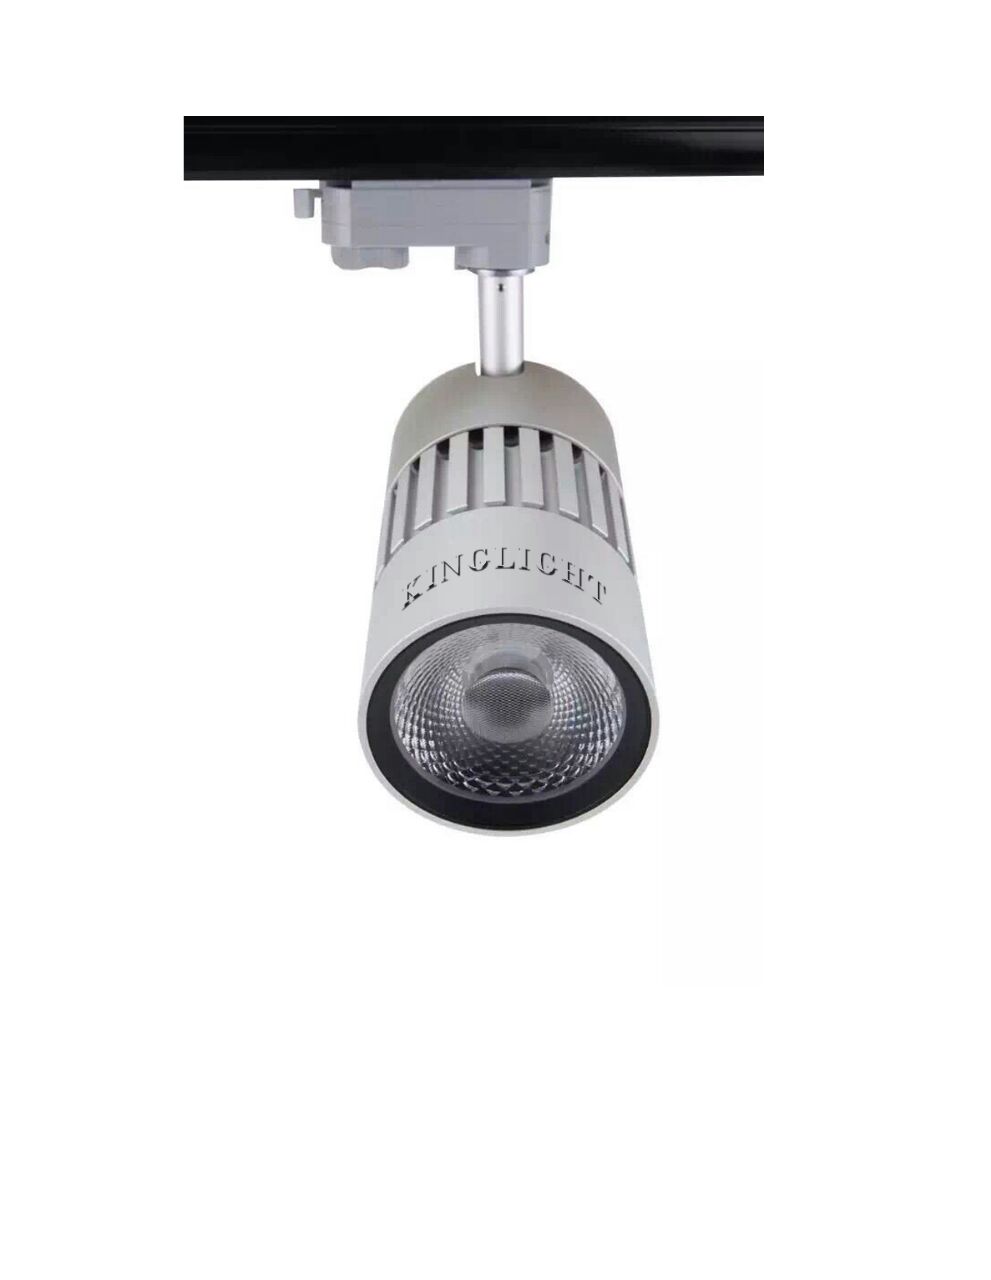 30W 4 wires 3 circuit/ 3 wires 2 circuit Triac dimming led track light